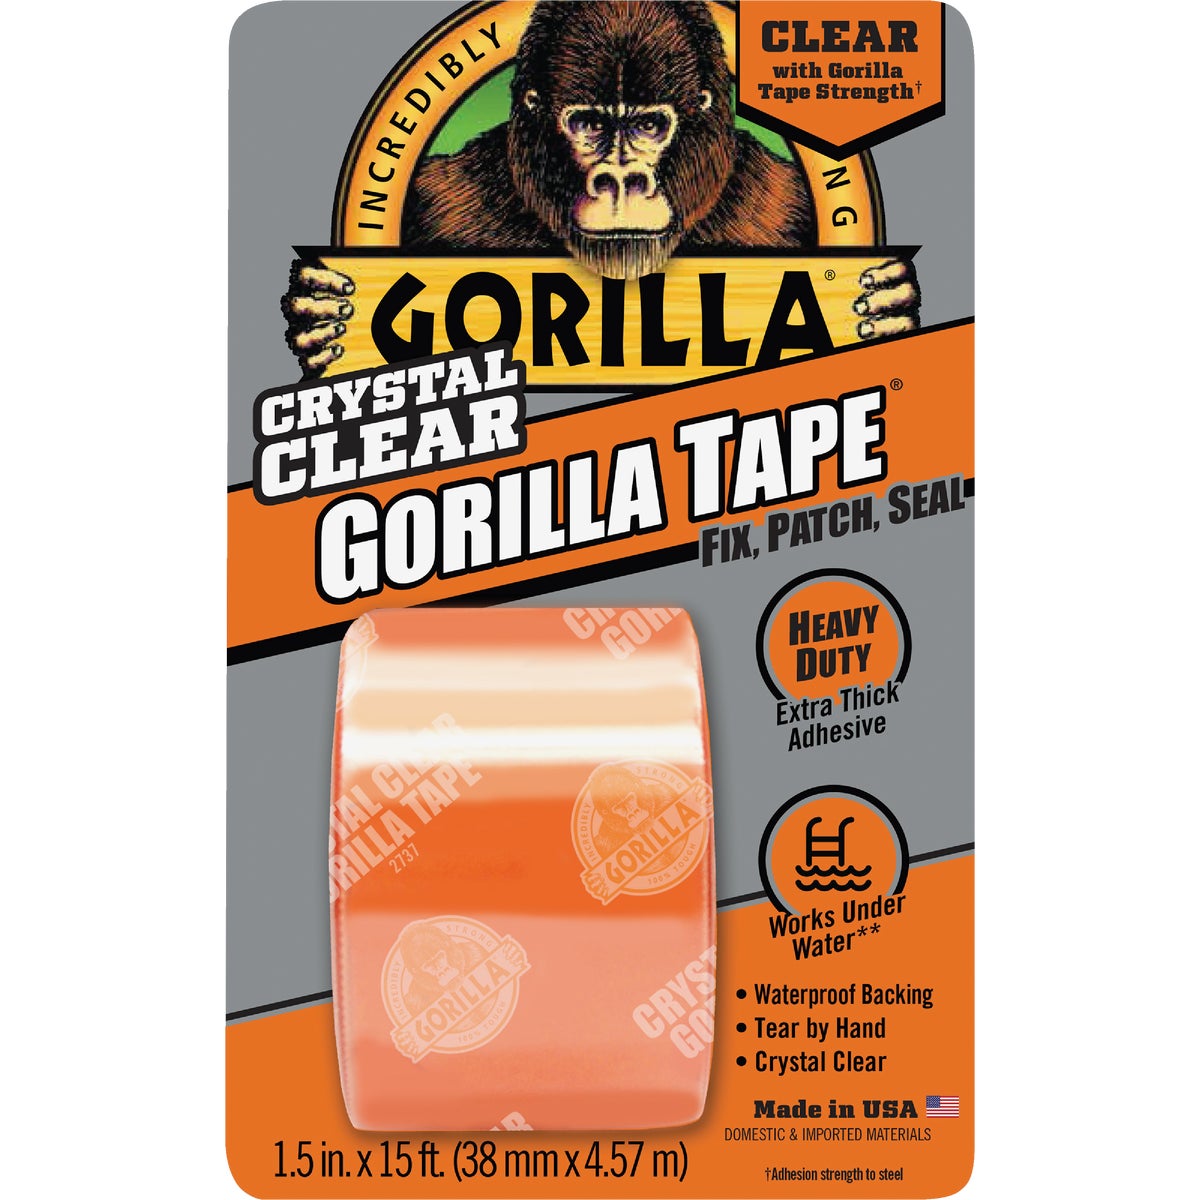 Gorilla 1-1/2 In. x 5 Yd. Crystal Clear Duct Tape, Clear